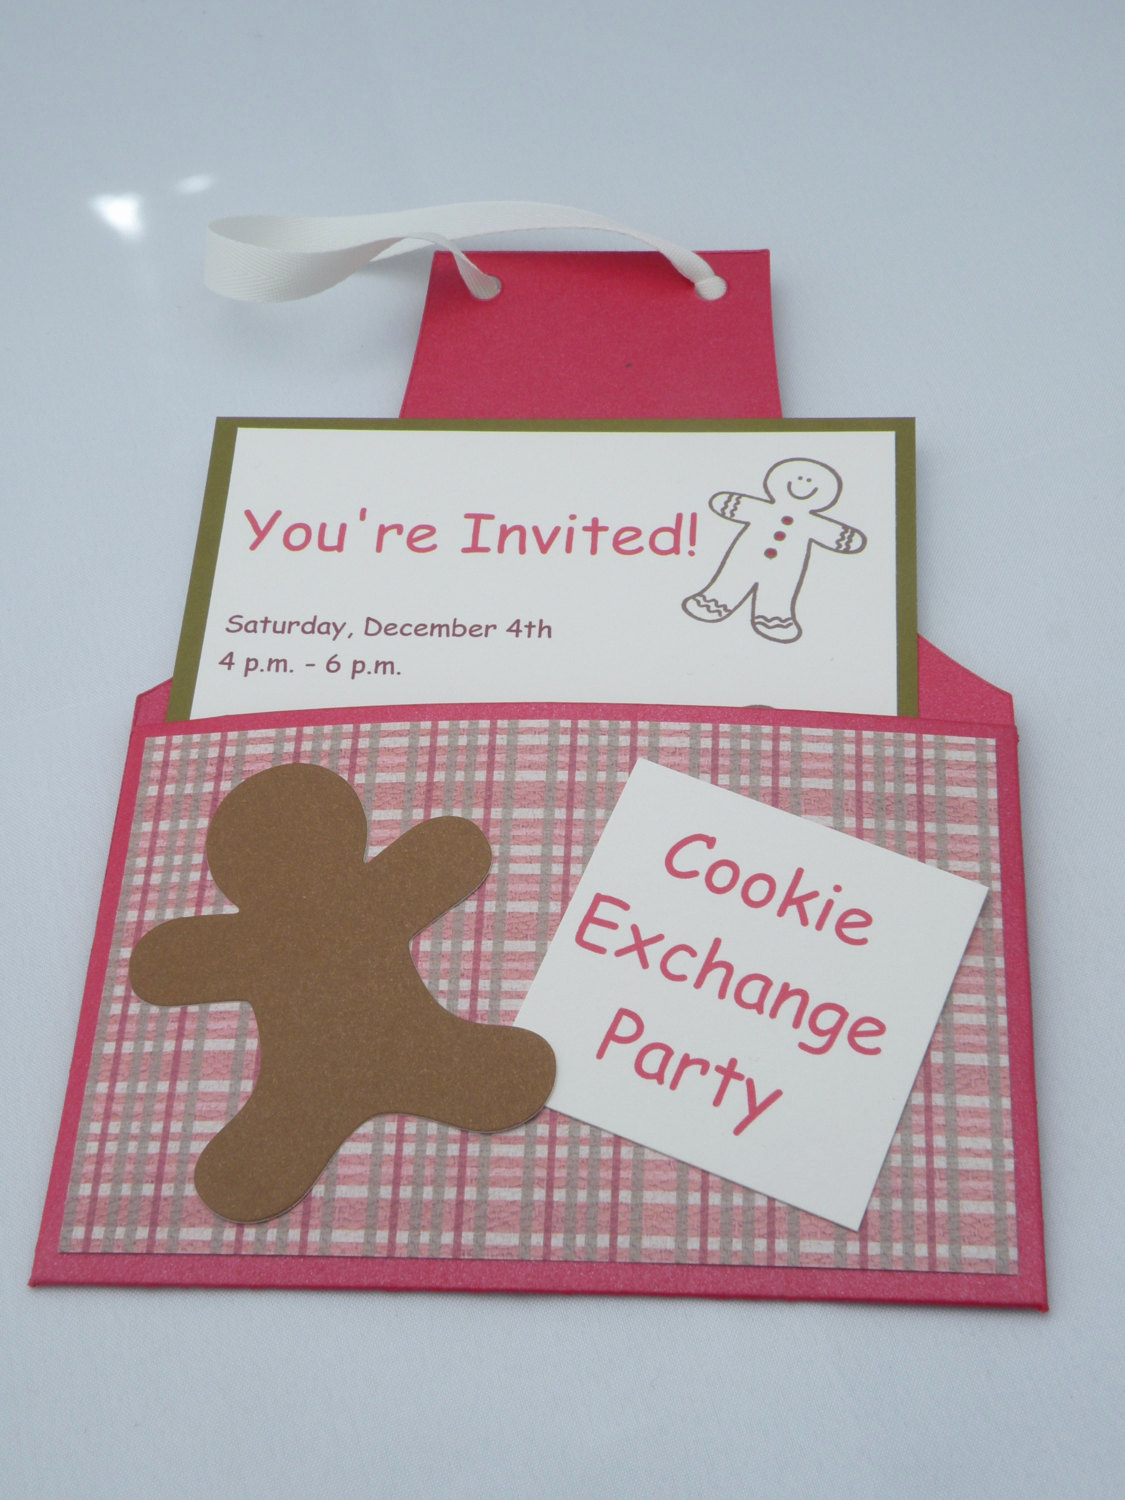 Cookie Exchange Invitation Wording Beautiful 8 Apron Invitations for Cookie Swap with Custom Wording